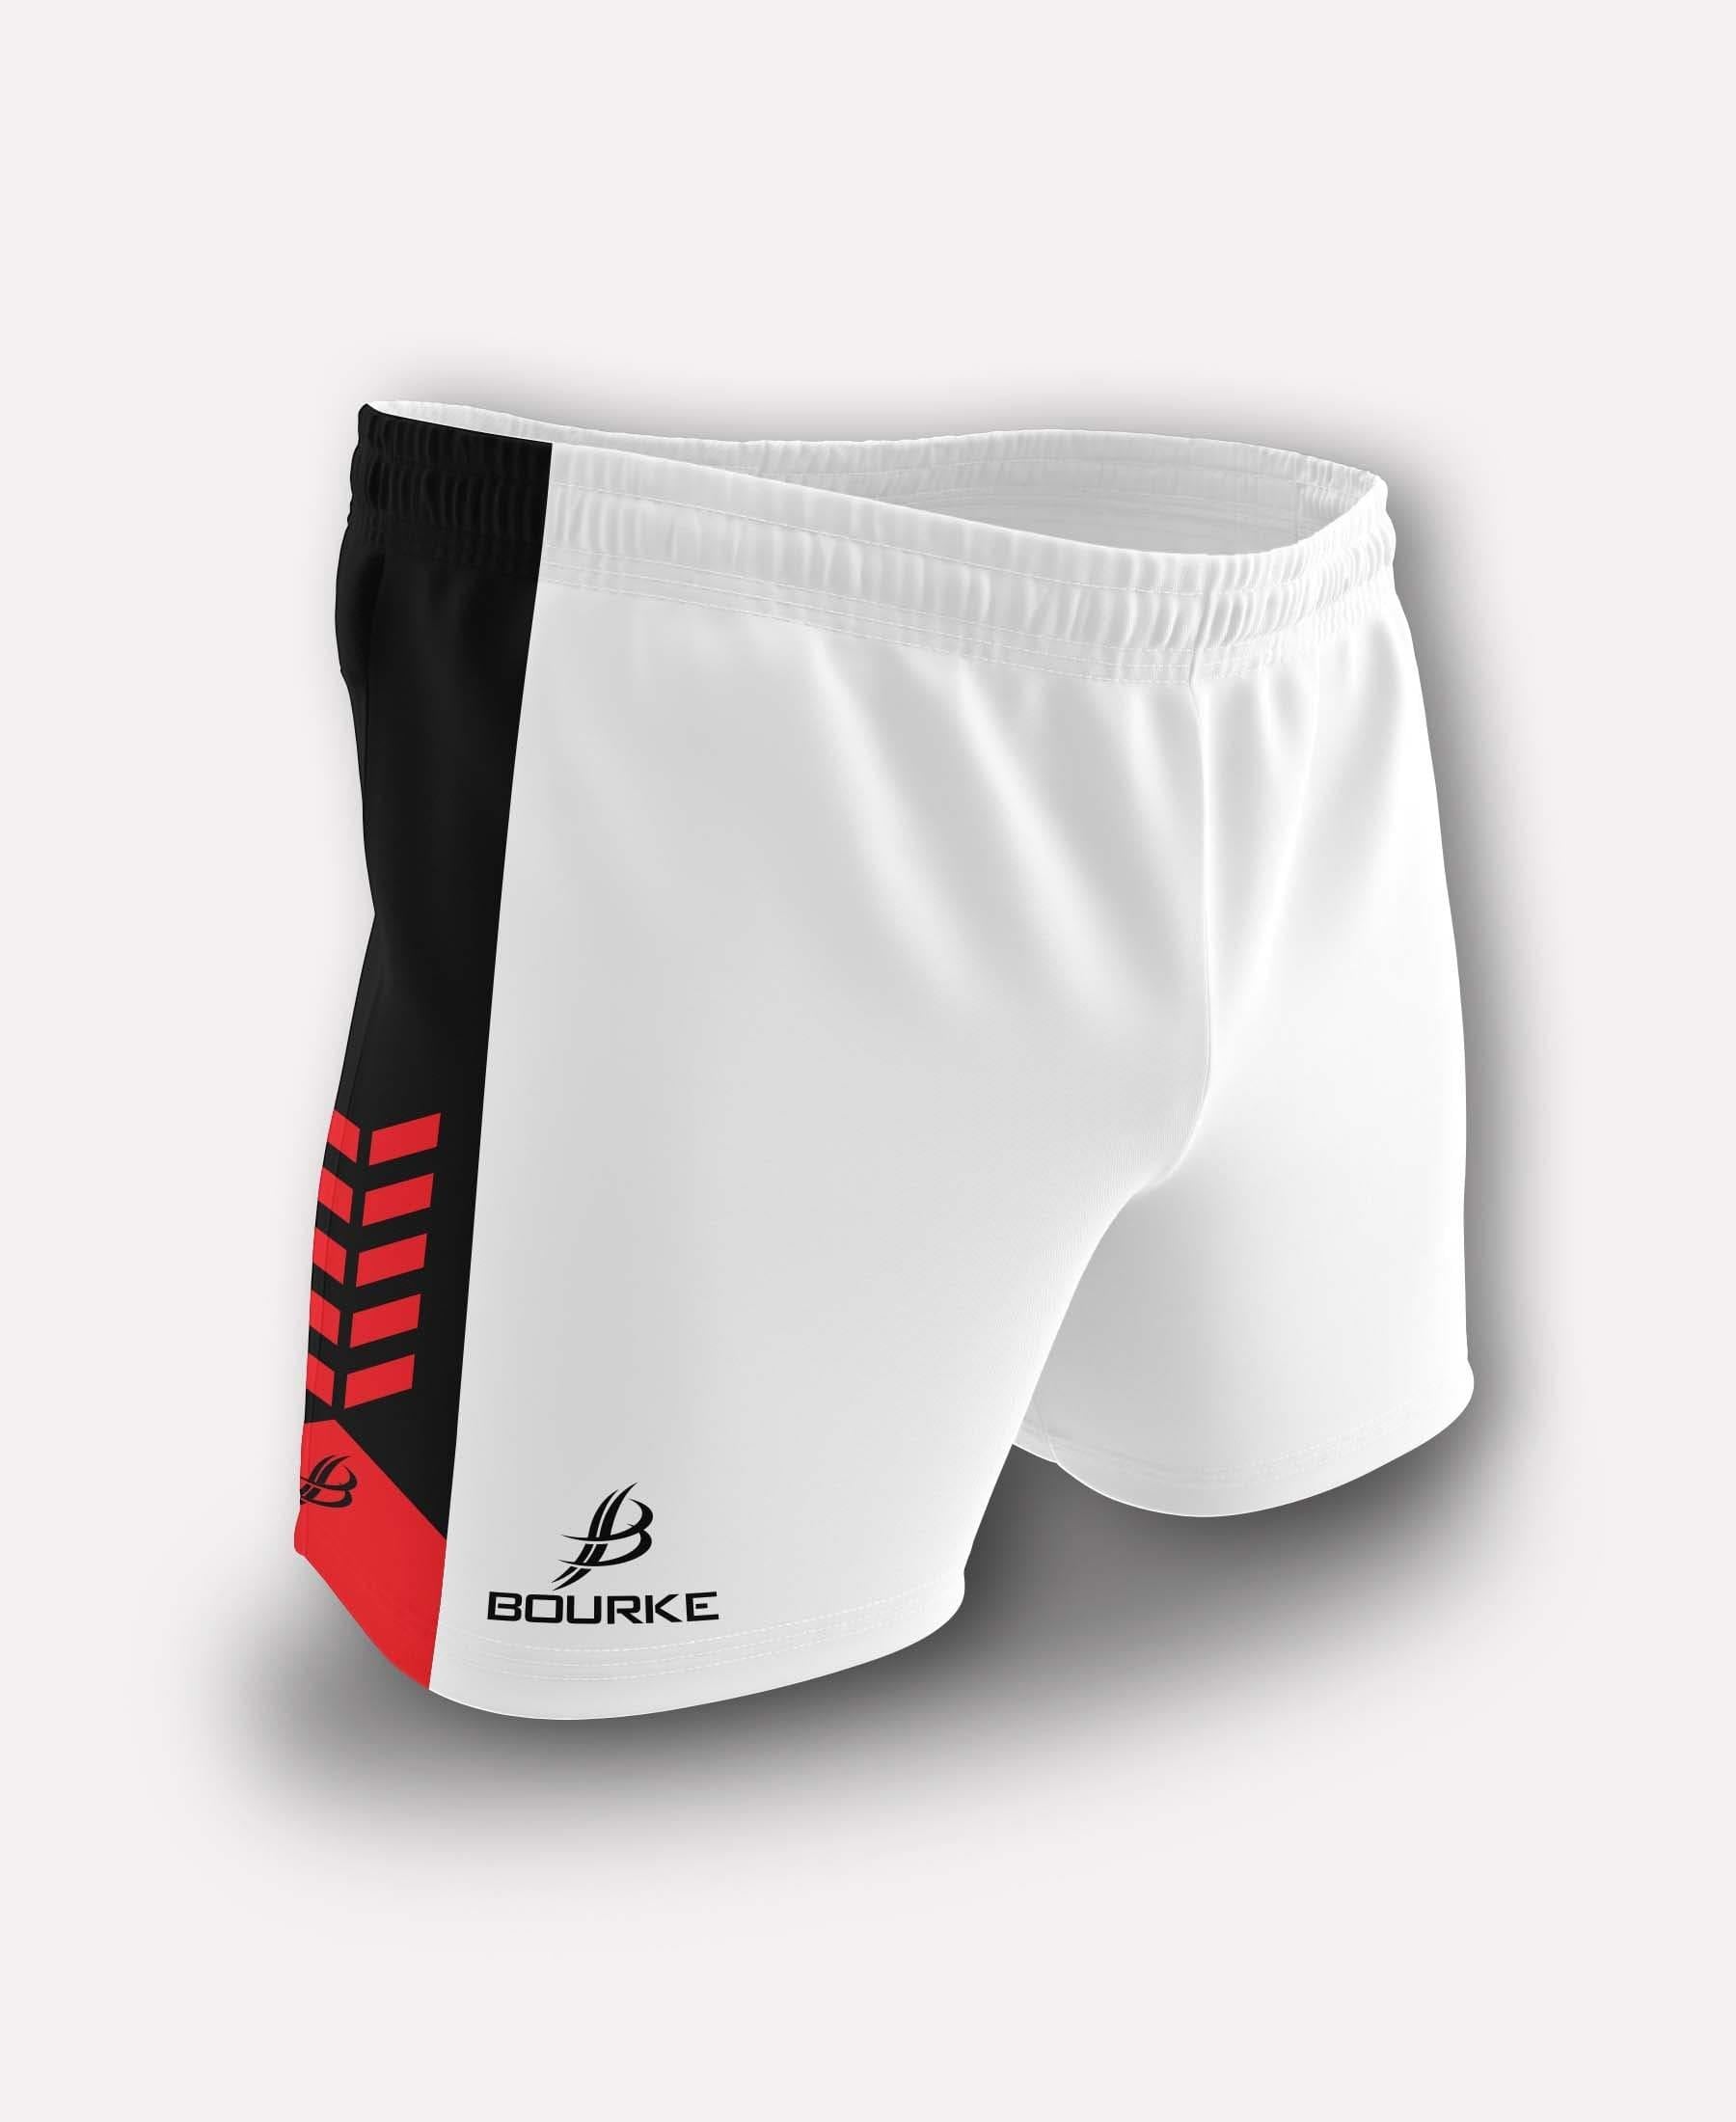 Chevron Adult Shorts (White/Black/Red) - Bourke Sports Limited